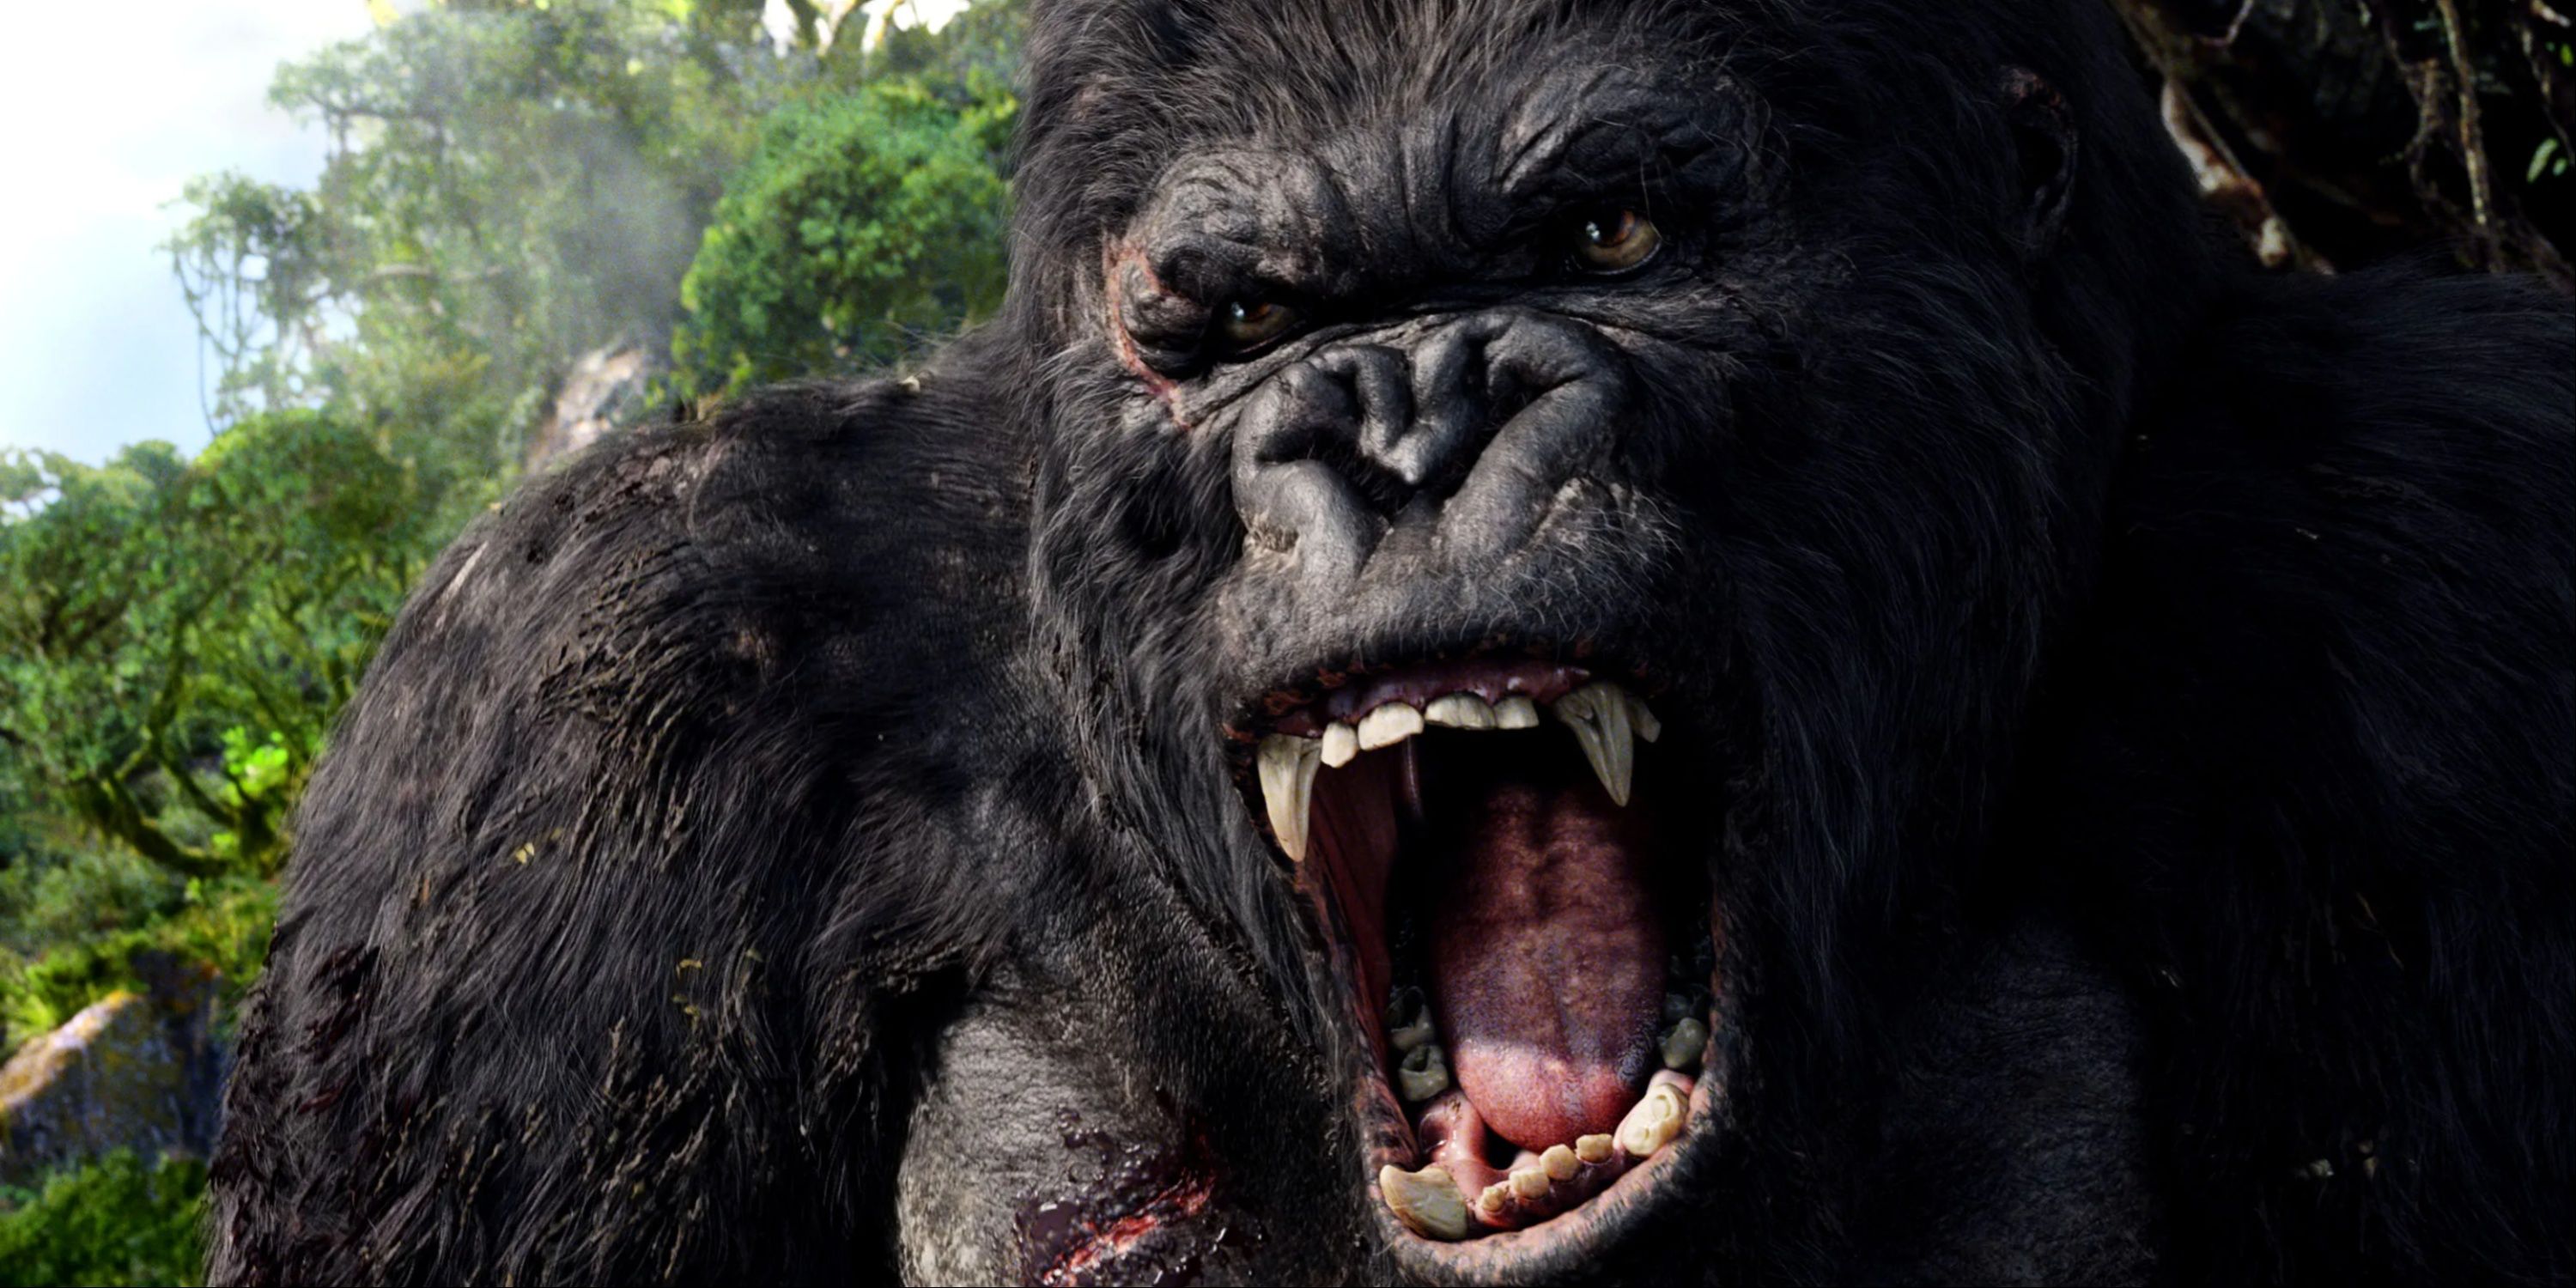 Peter Jackson's King Kong is the biggest, baddest Kong ever put on film